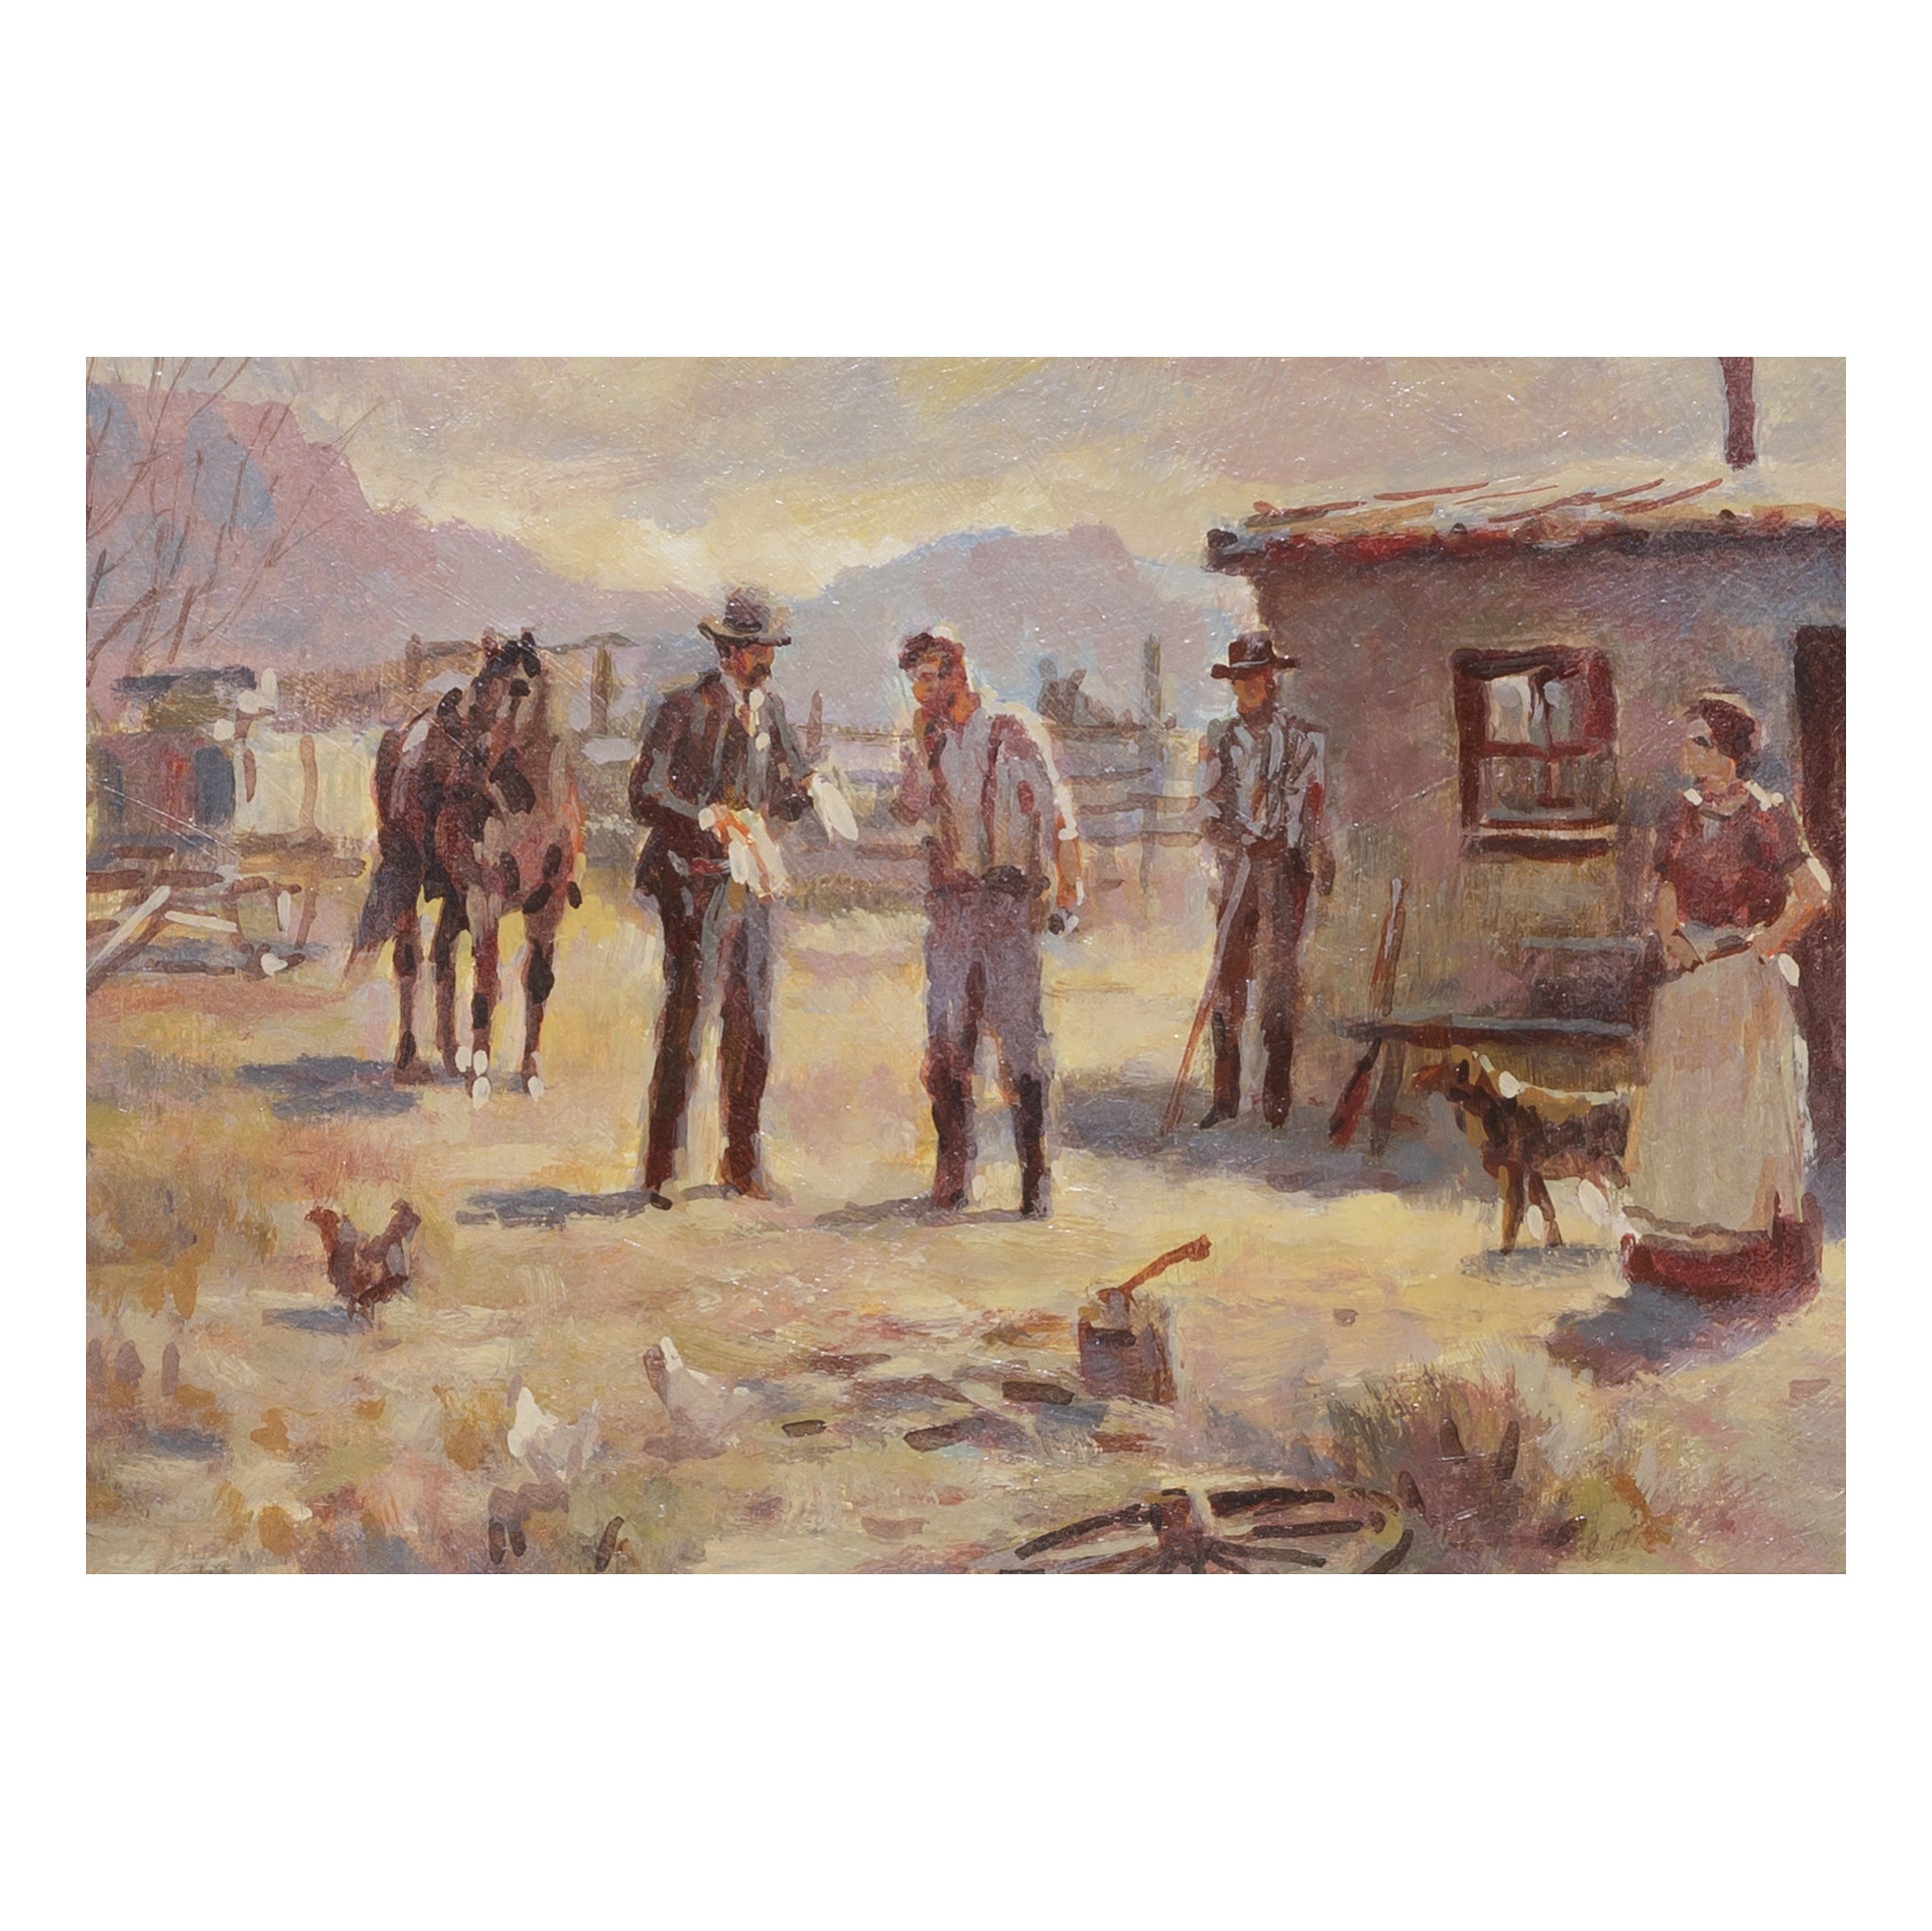 Tax Collector by Ron Crooks, Fine Art, Painting, Western